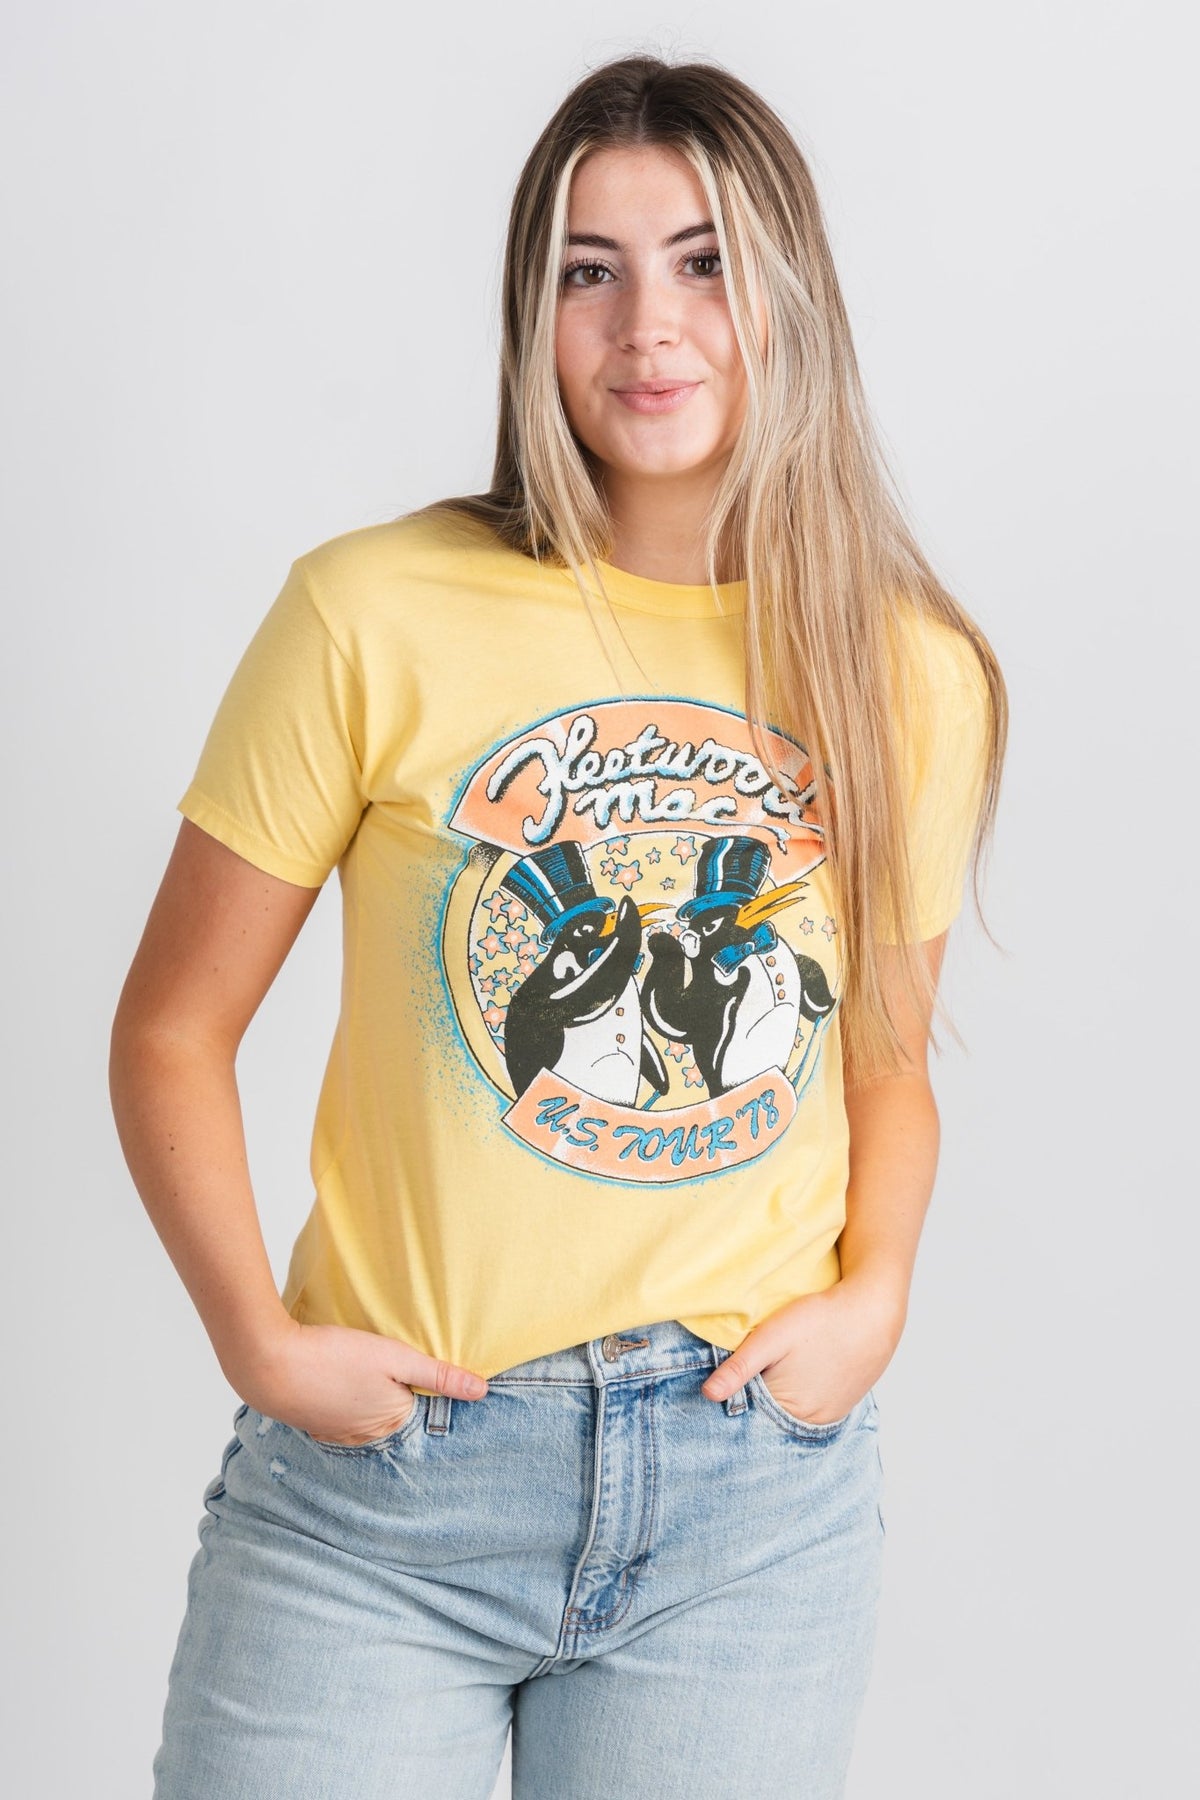 DayDreamer Fleetwood Mac tour 78 ringer t-shirt yellow bloom - Trendy Band T-Shirts and Sweatshirts at Lush Fashion Lounge Boutique in Oklahoma City